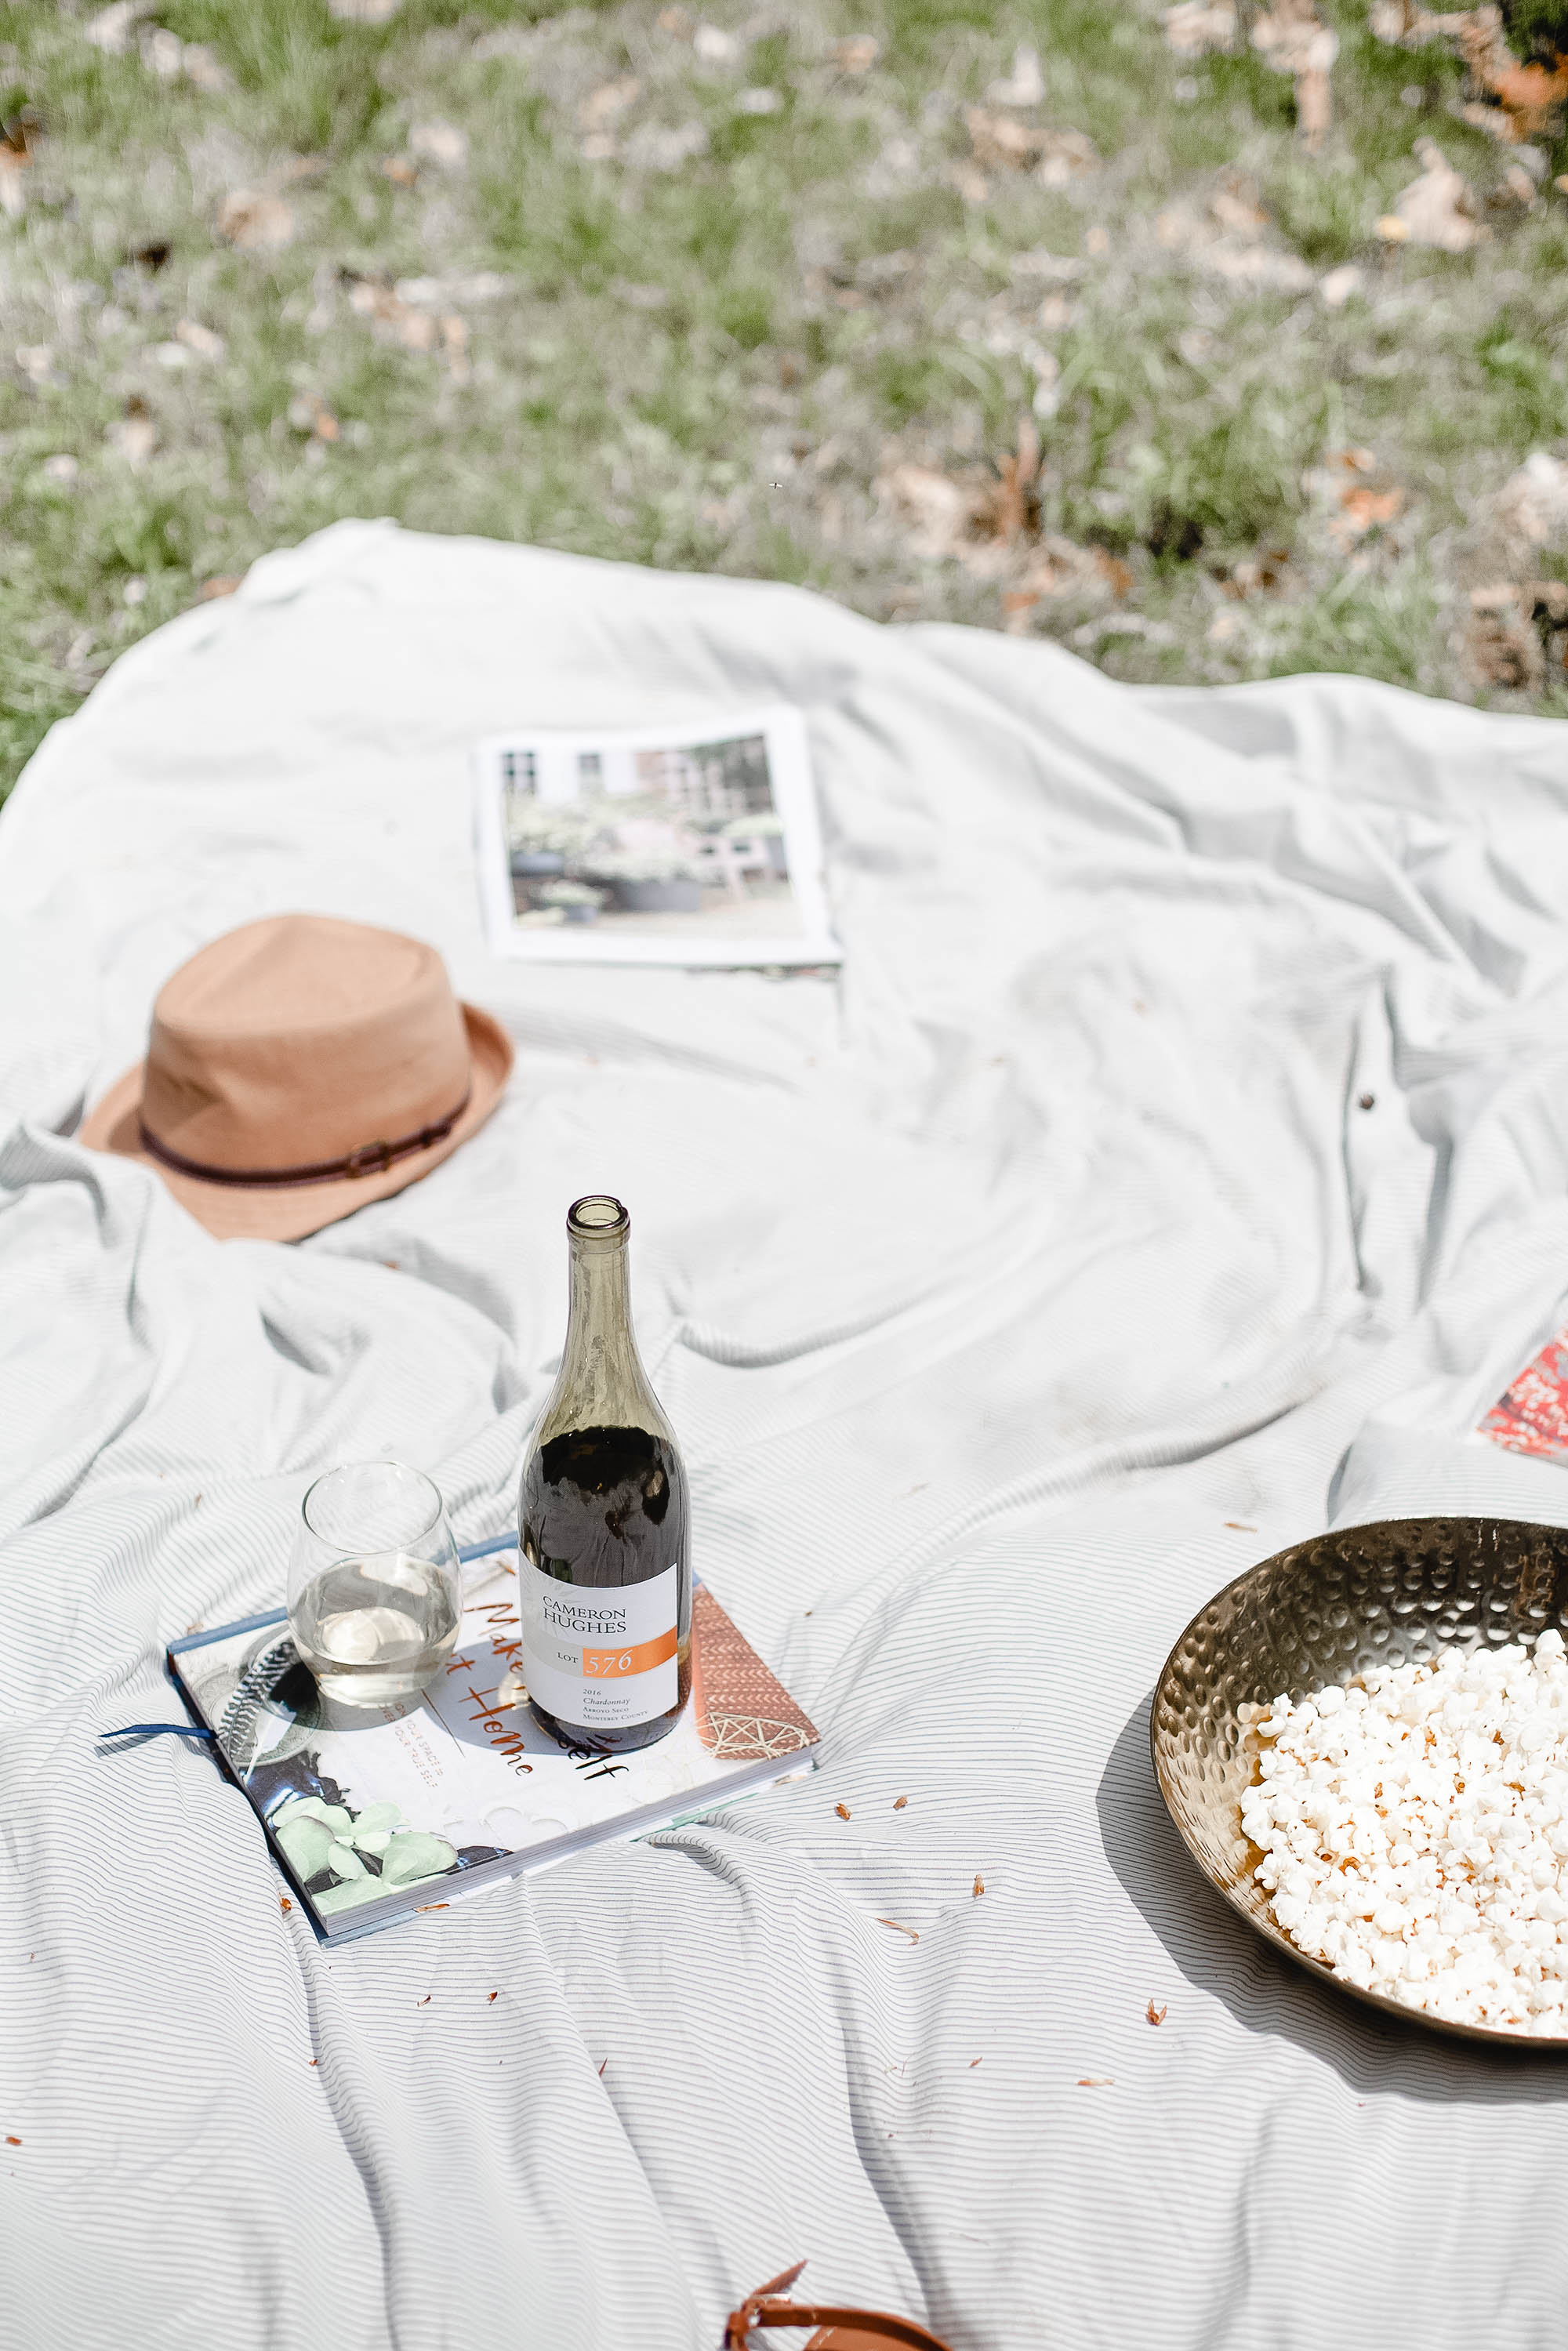 Picnic scene with wine paired with a nice book outdoors